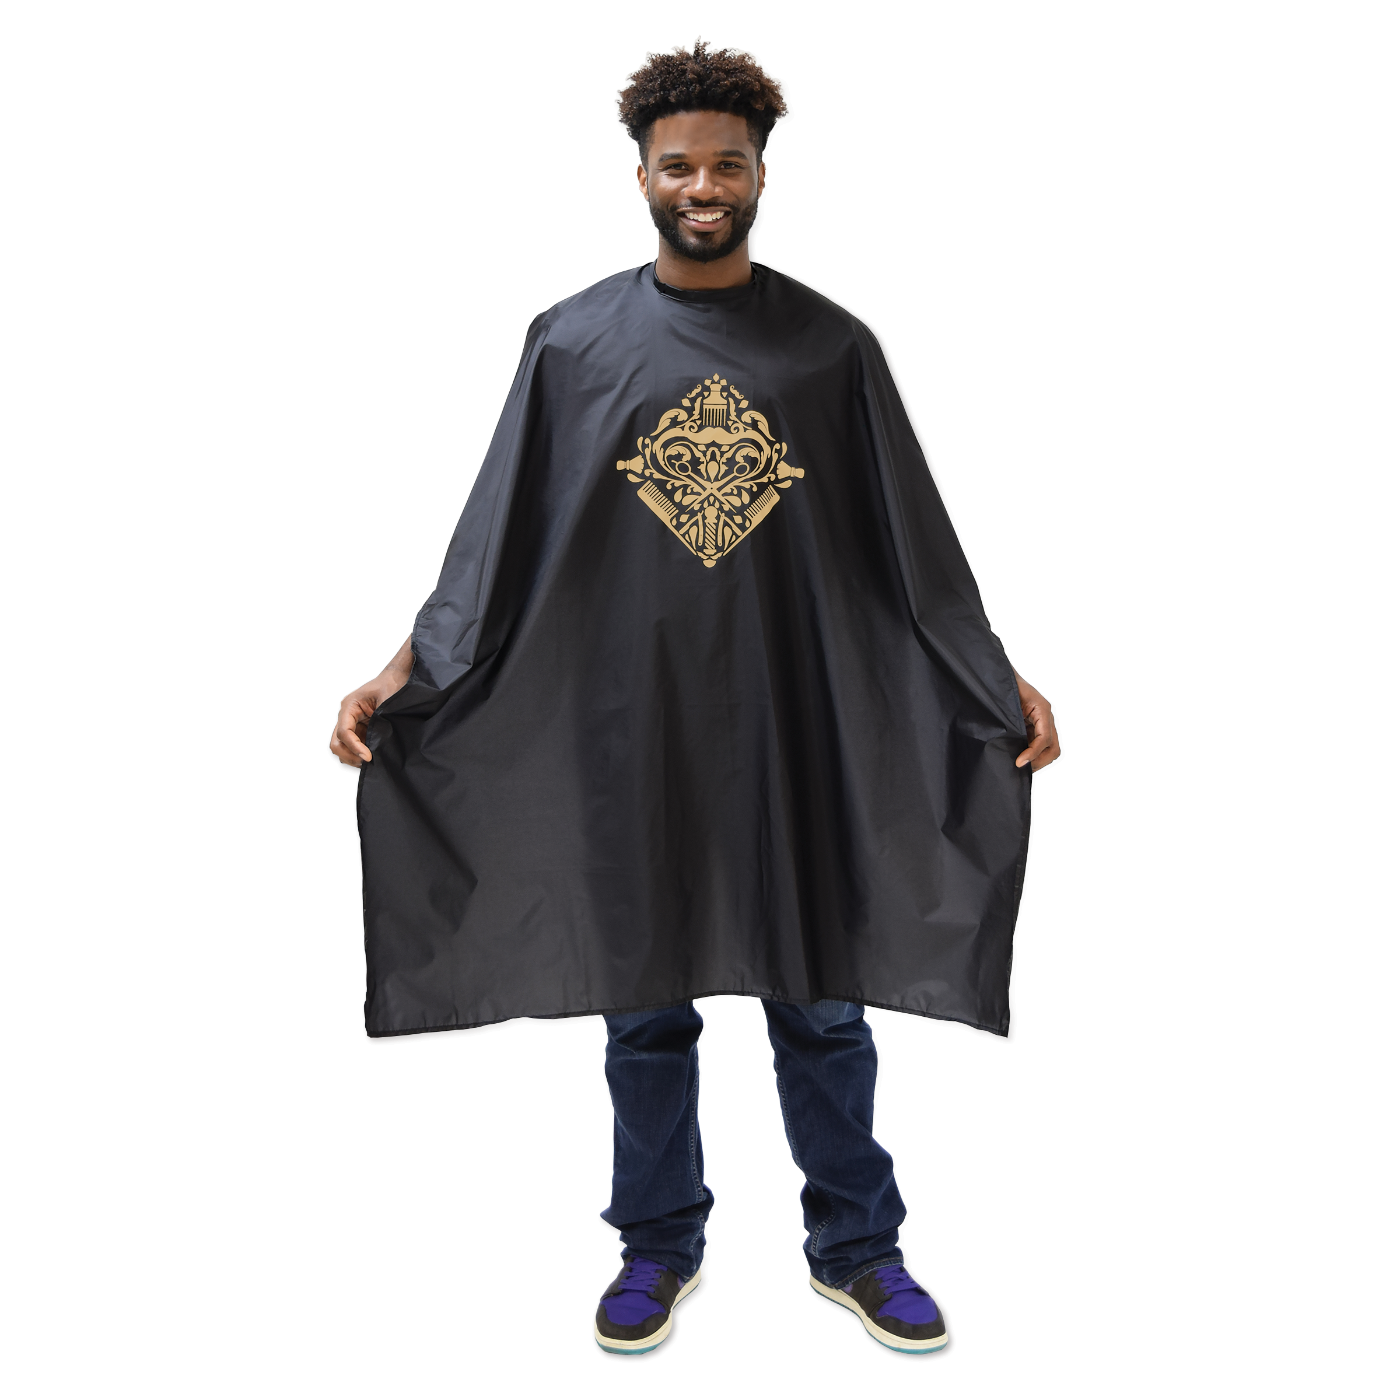 Barber Cape with Metallic Gold Design